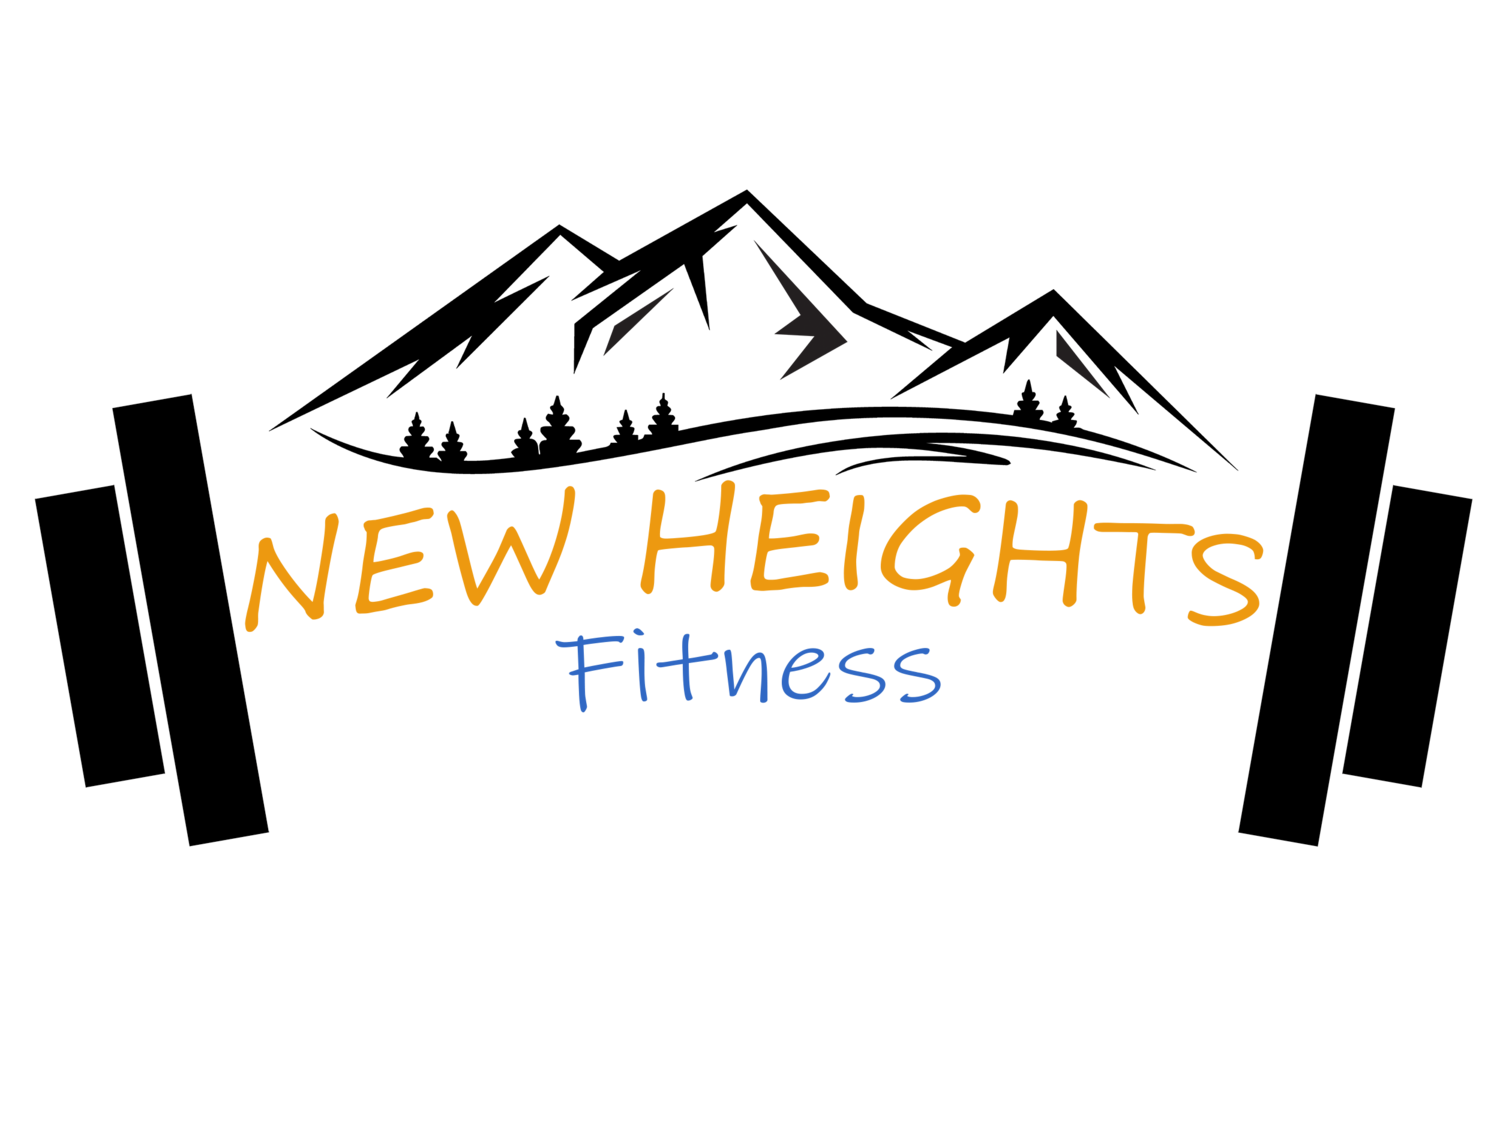 New Heights Fitness